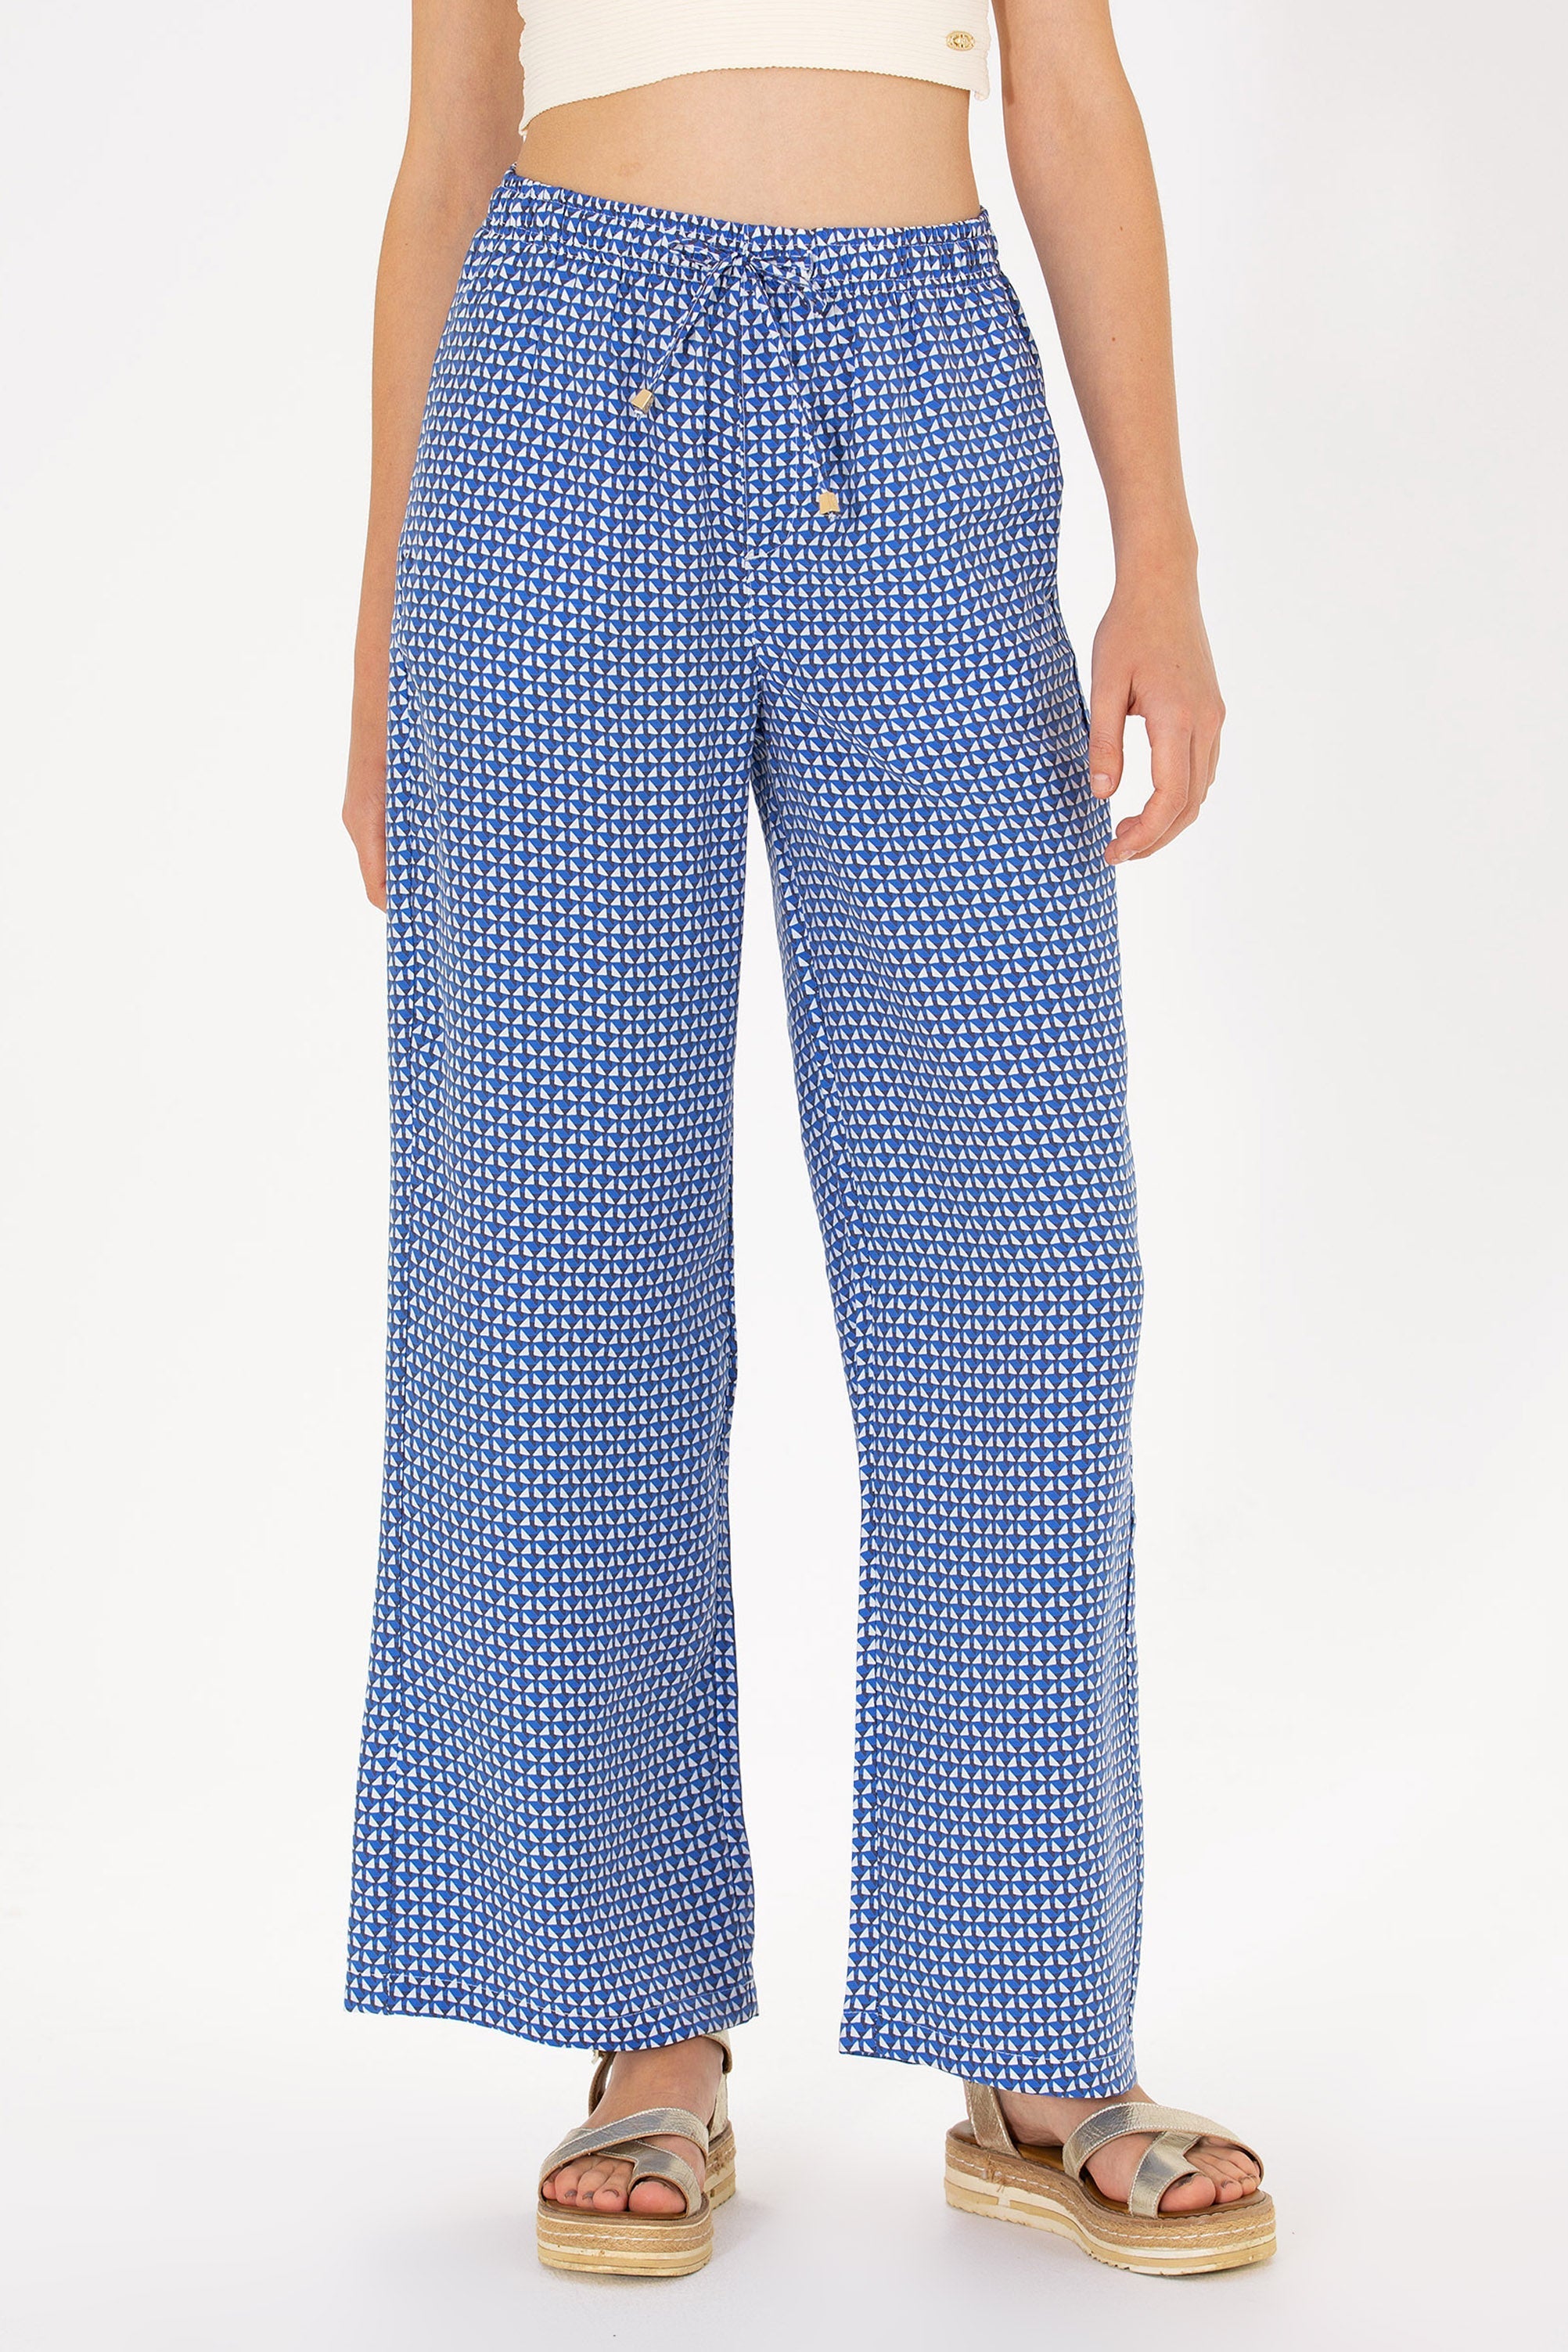 Patterned Multi-Color Slip On Trousers